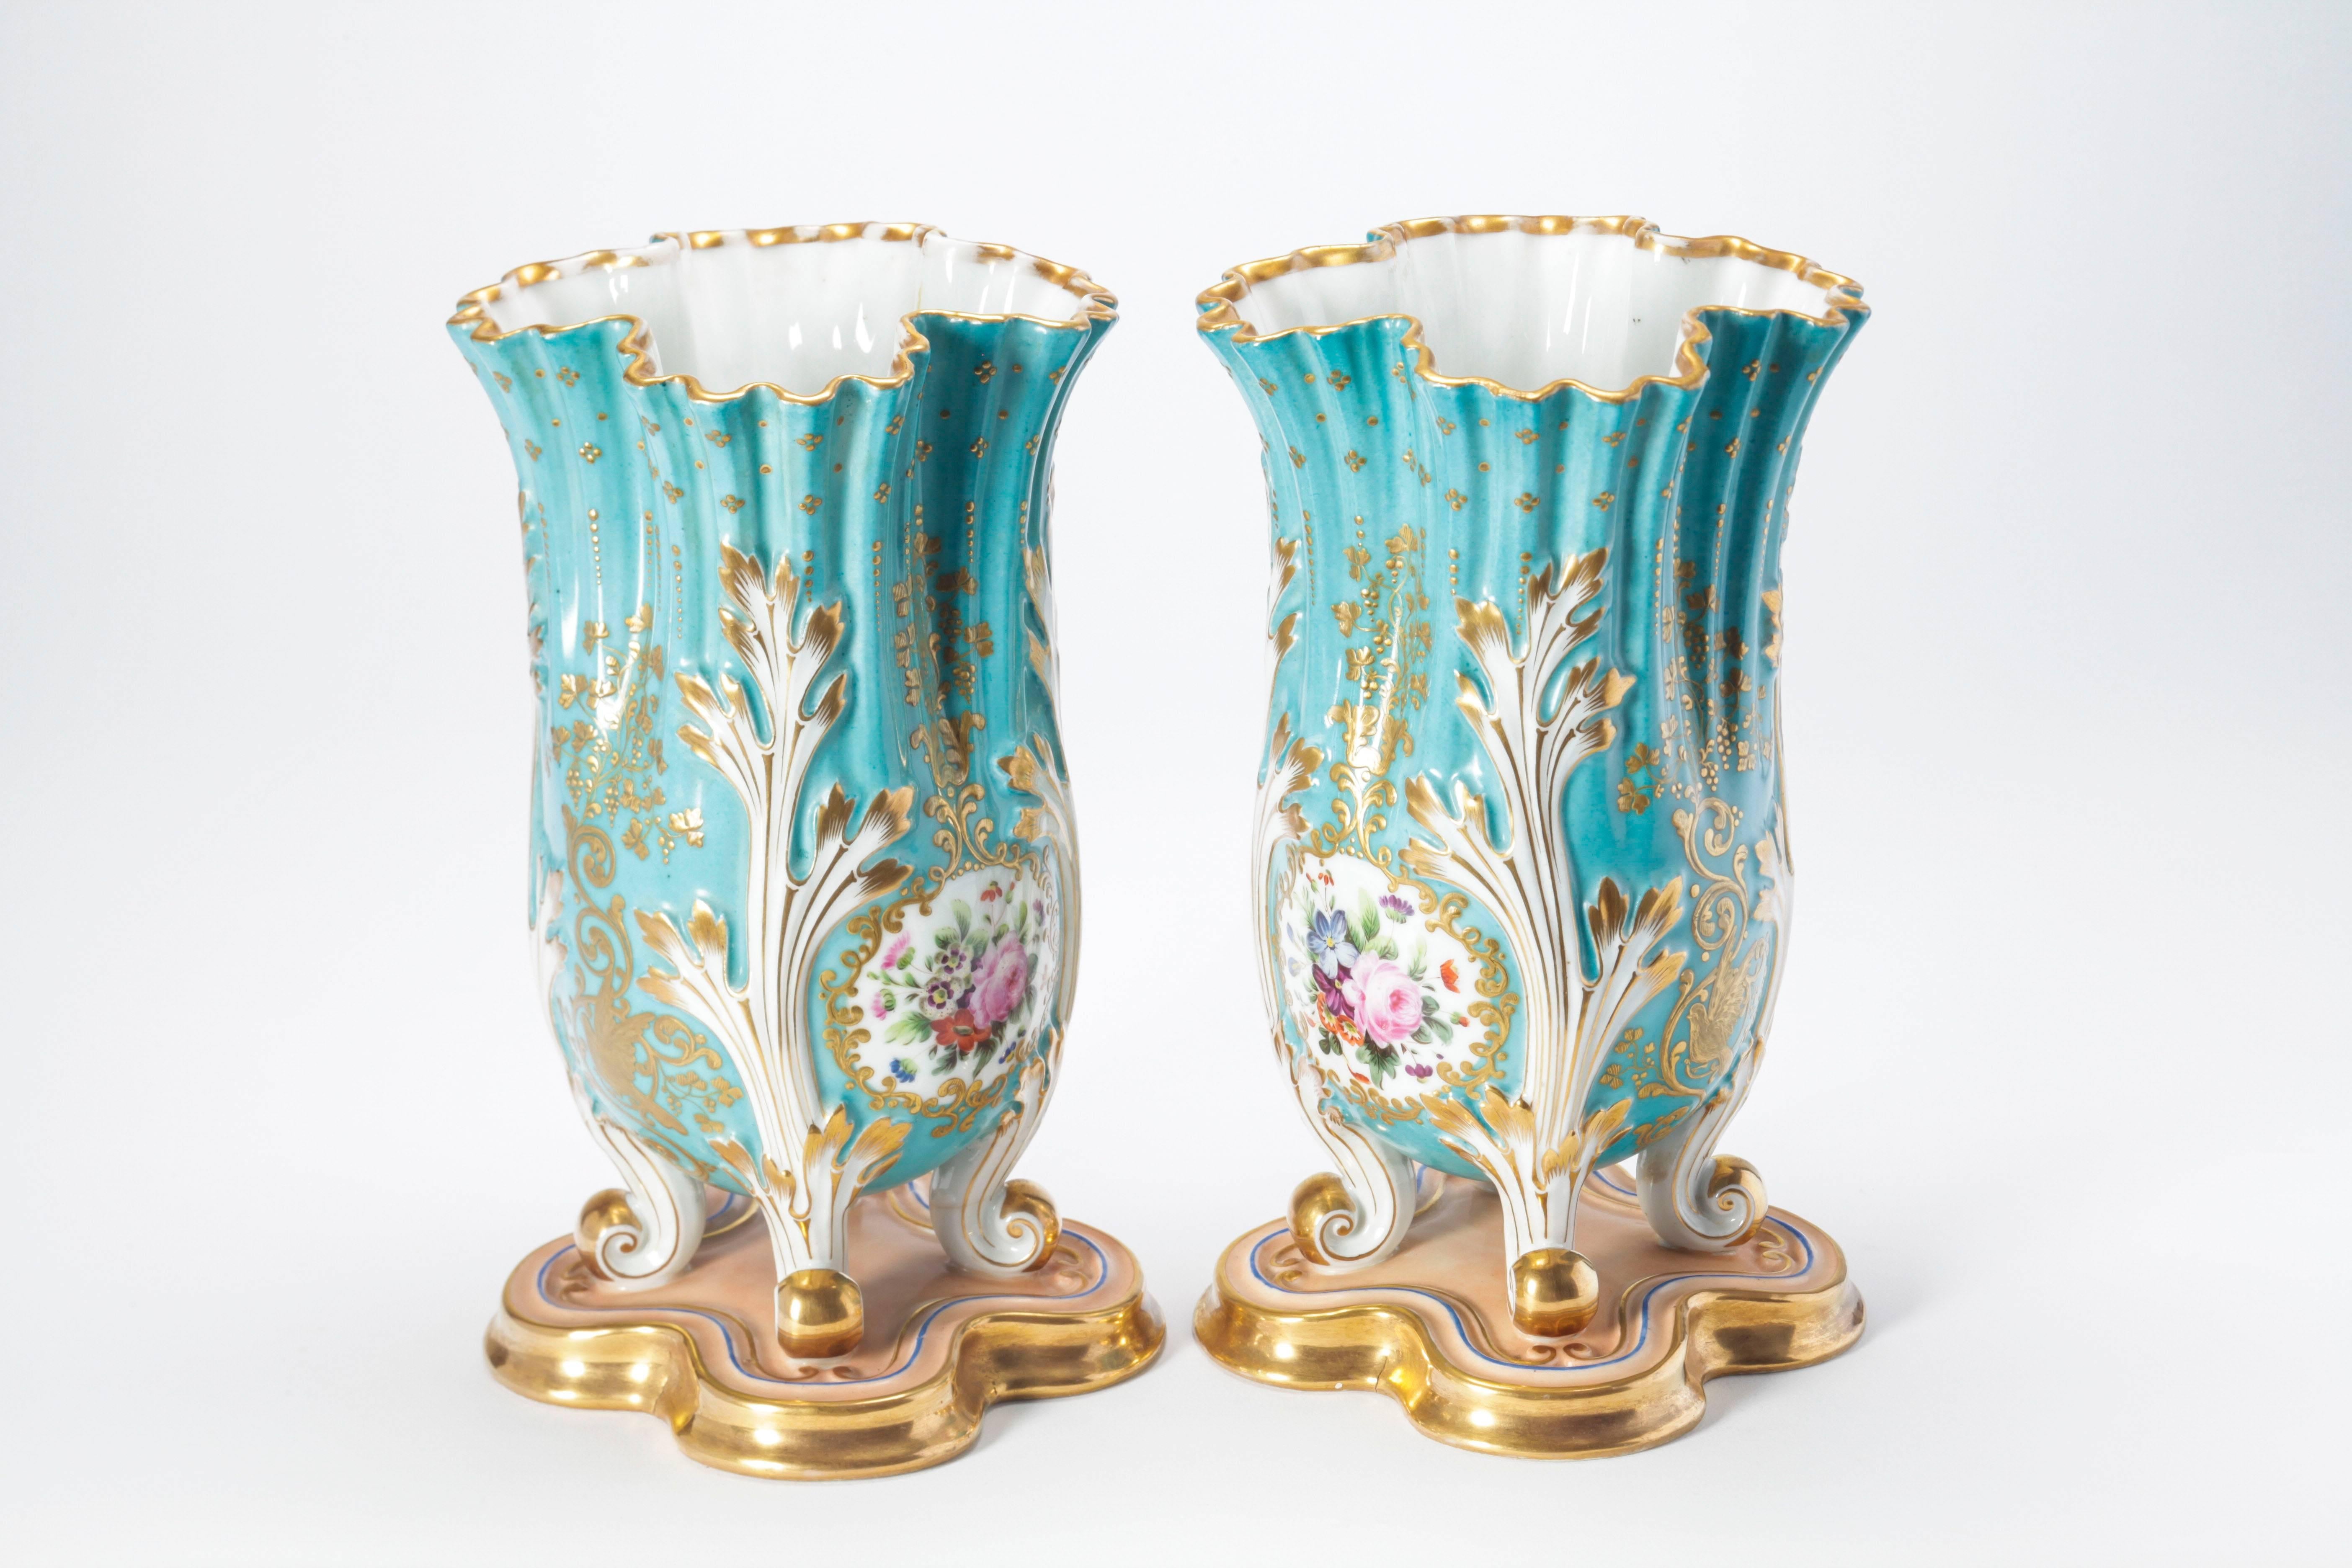 Pair of 19th century blue floral vases.